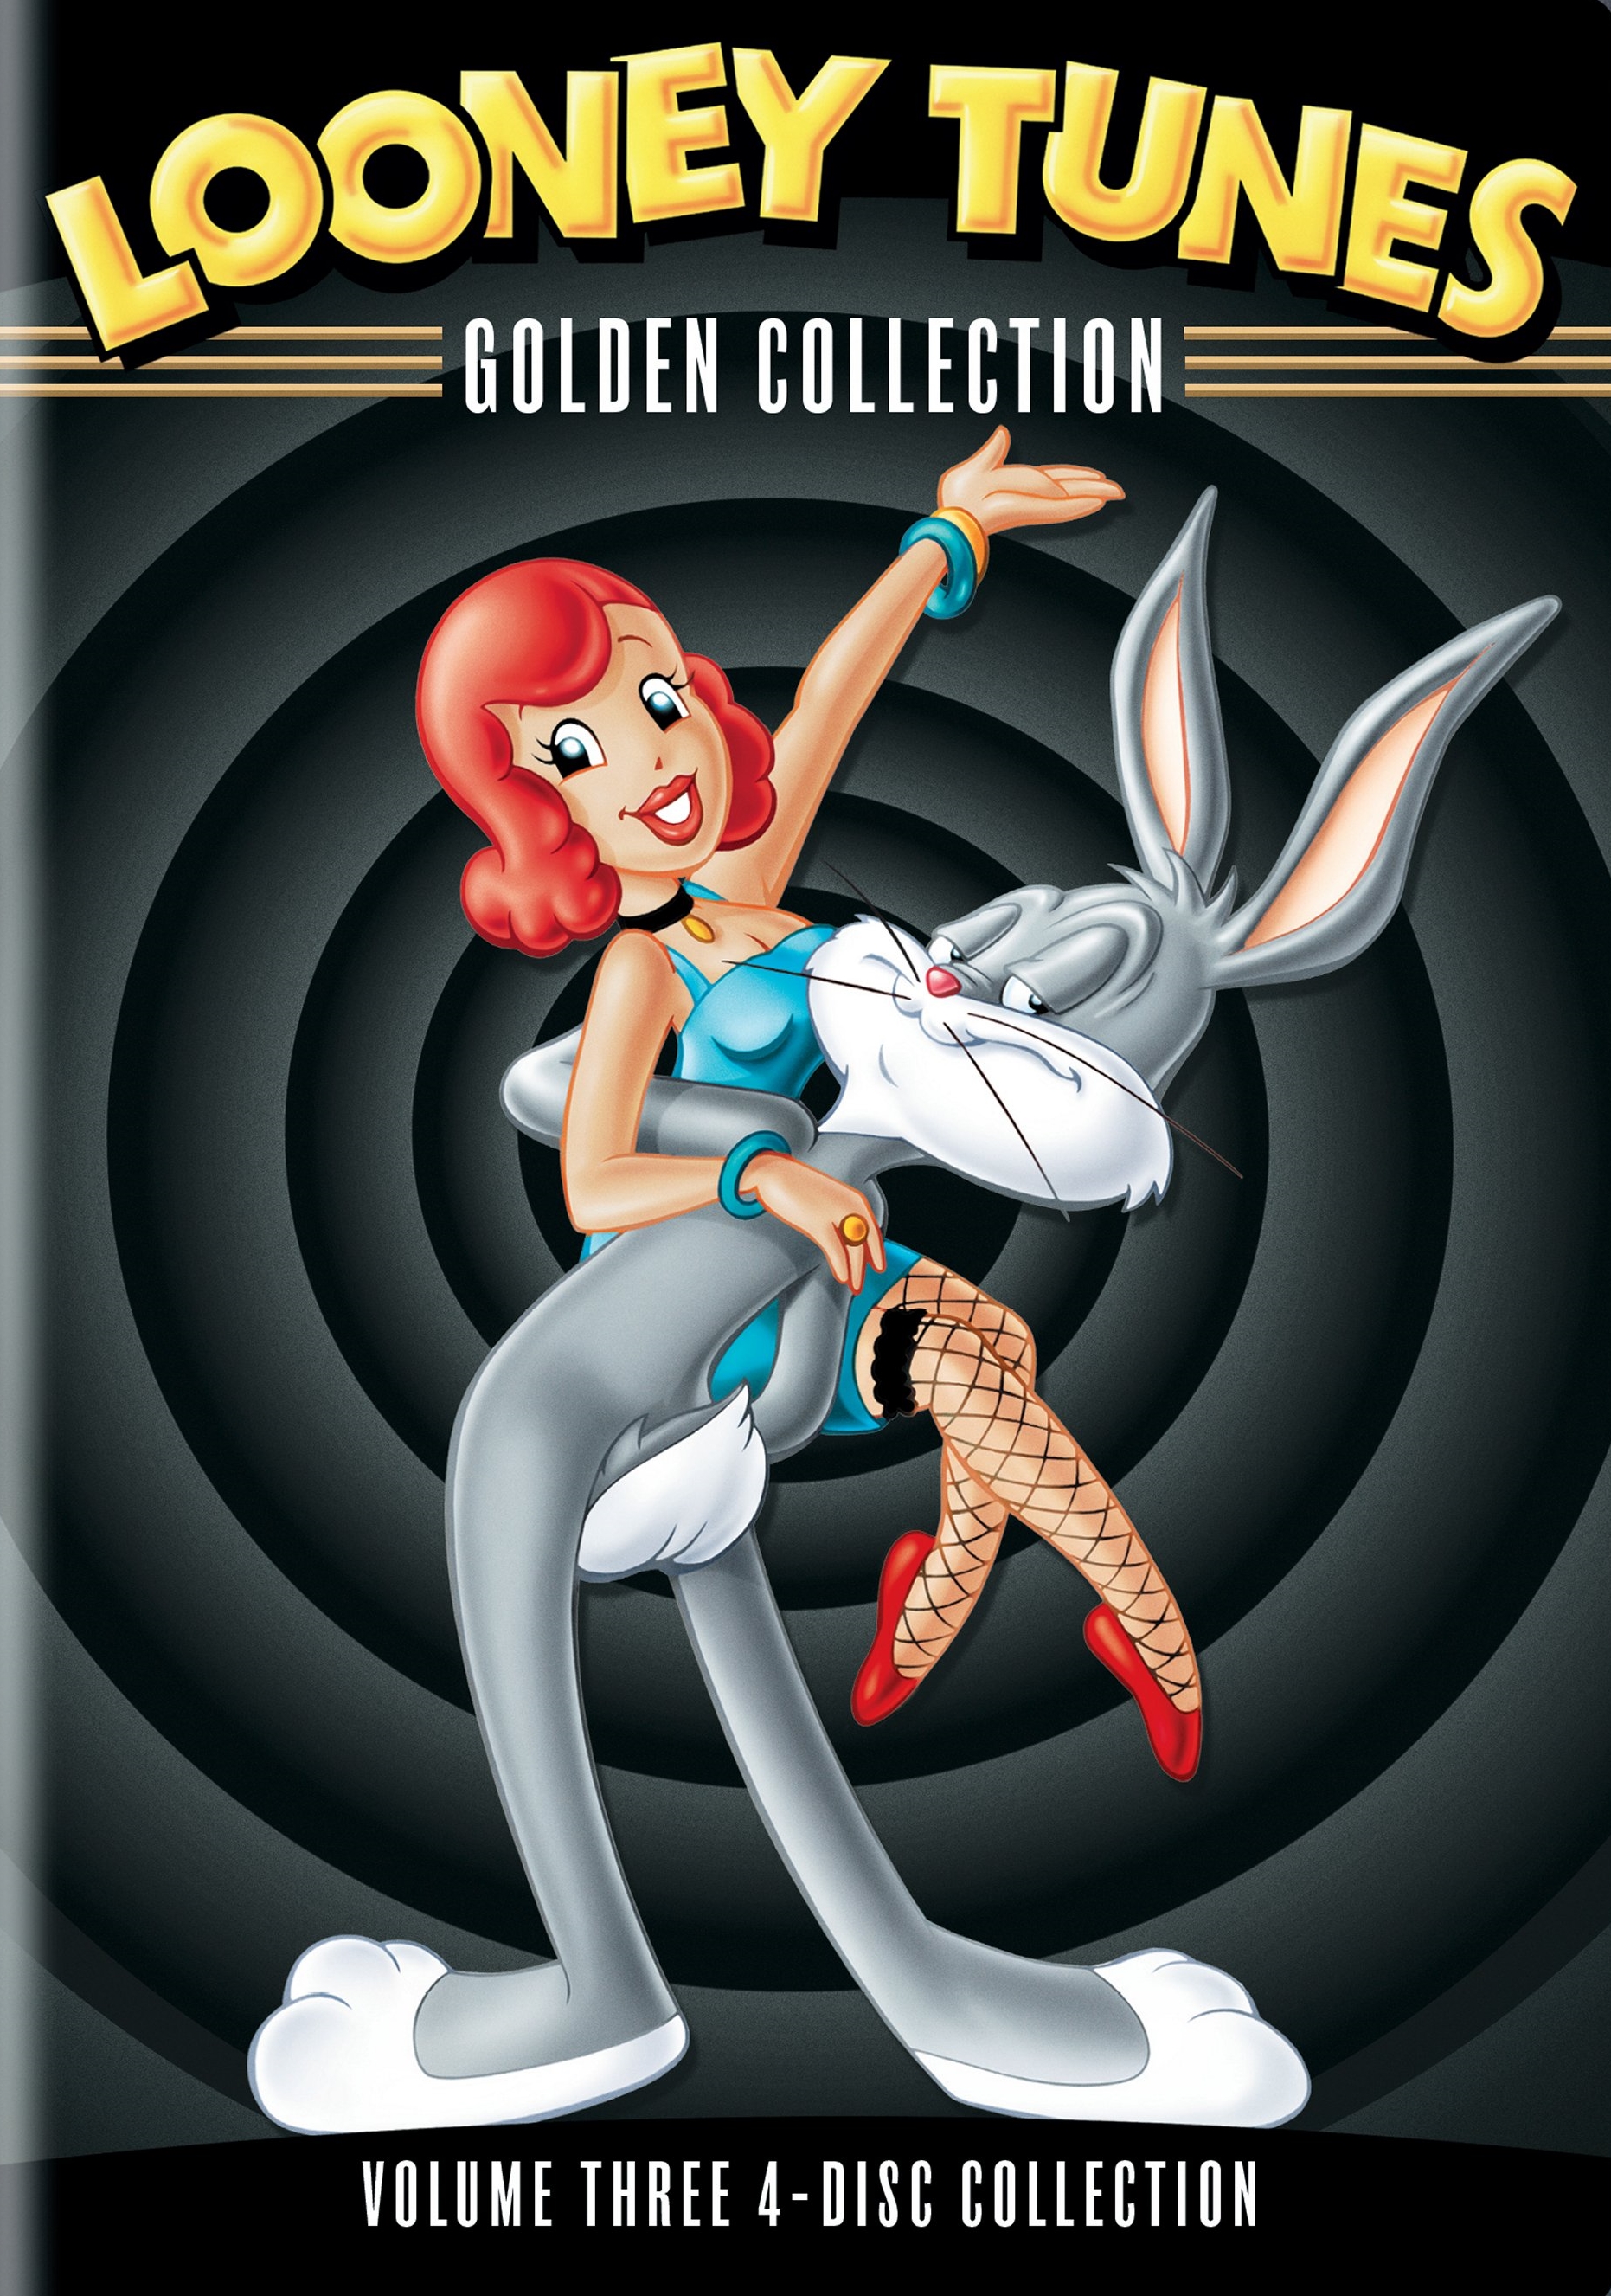 Best of WB 100th: Looney Tunes 10-Film Collection - Best Buy